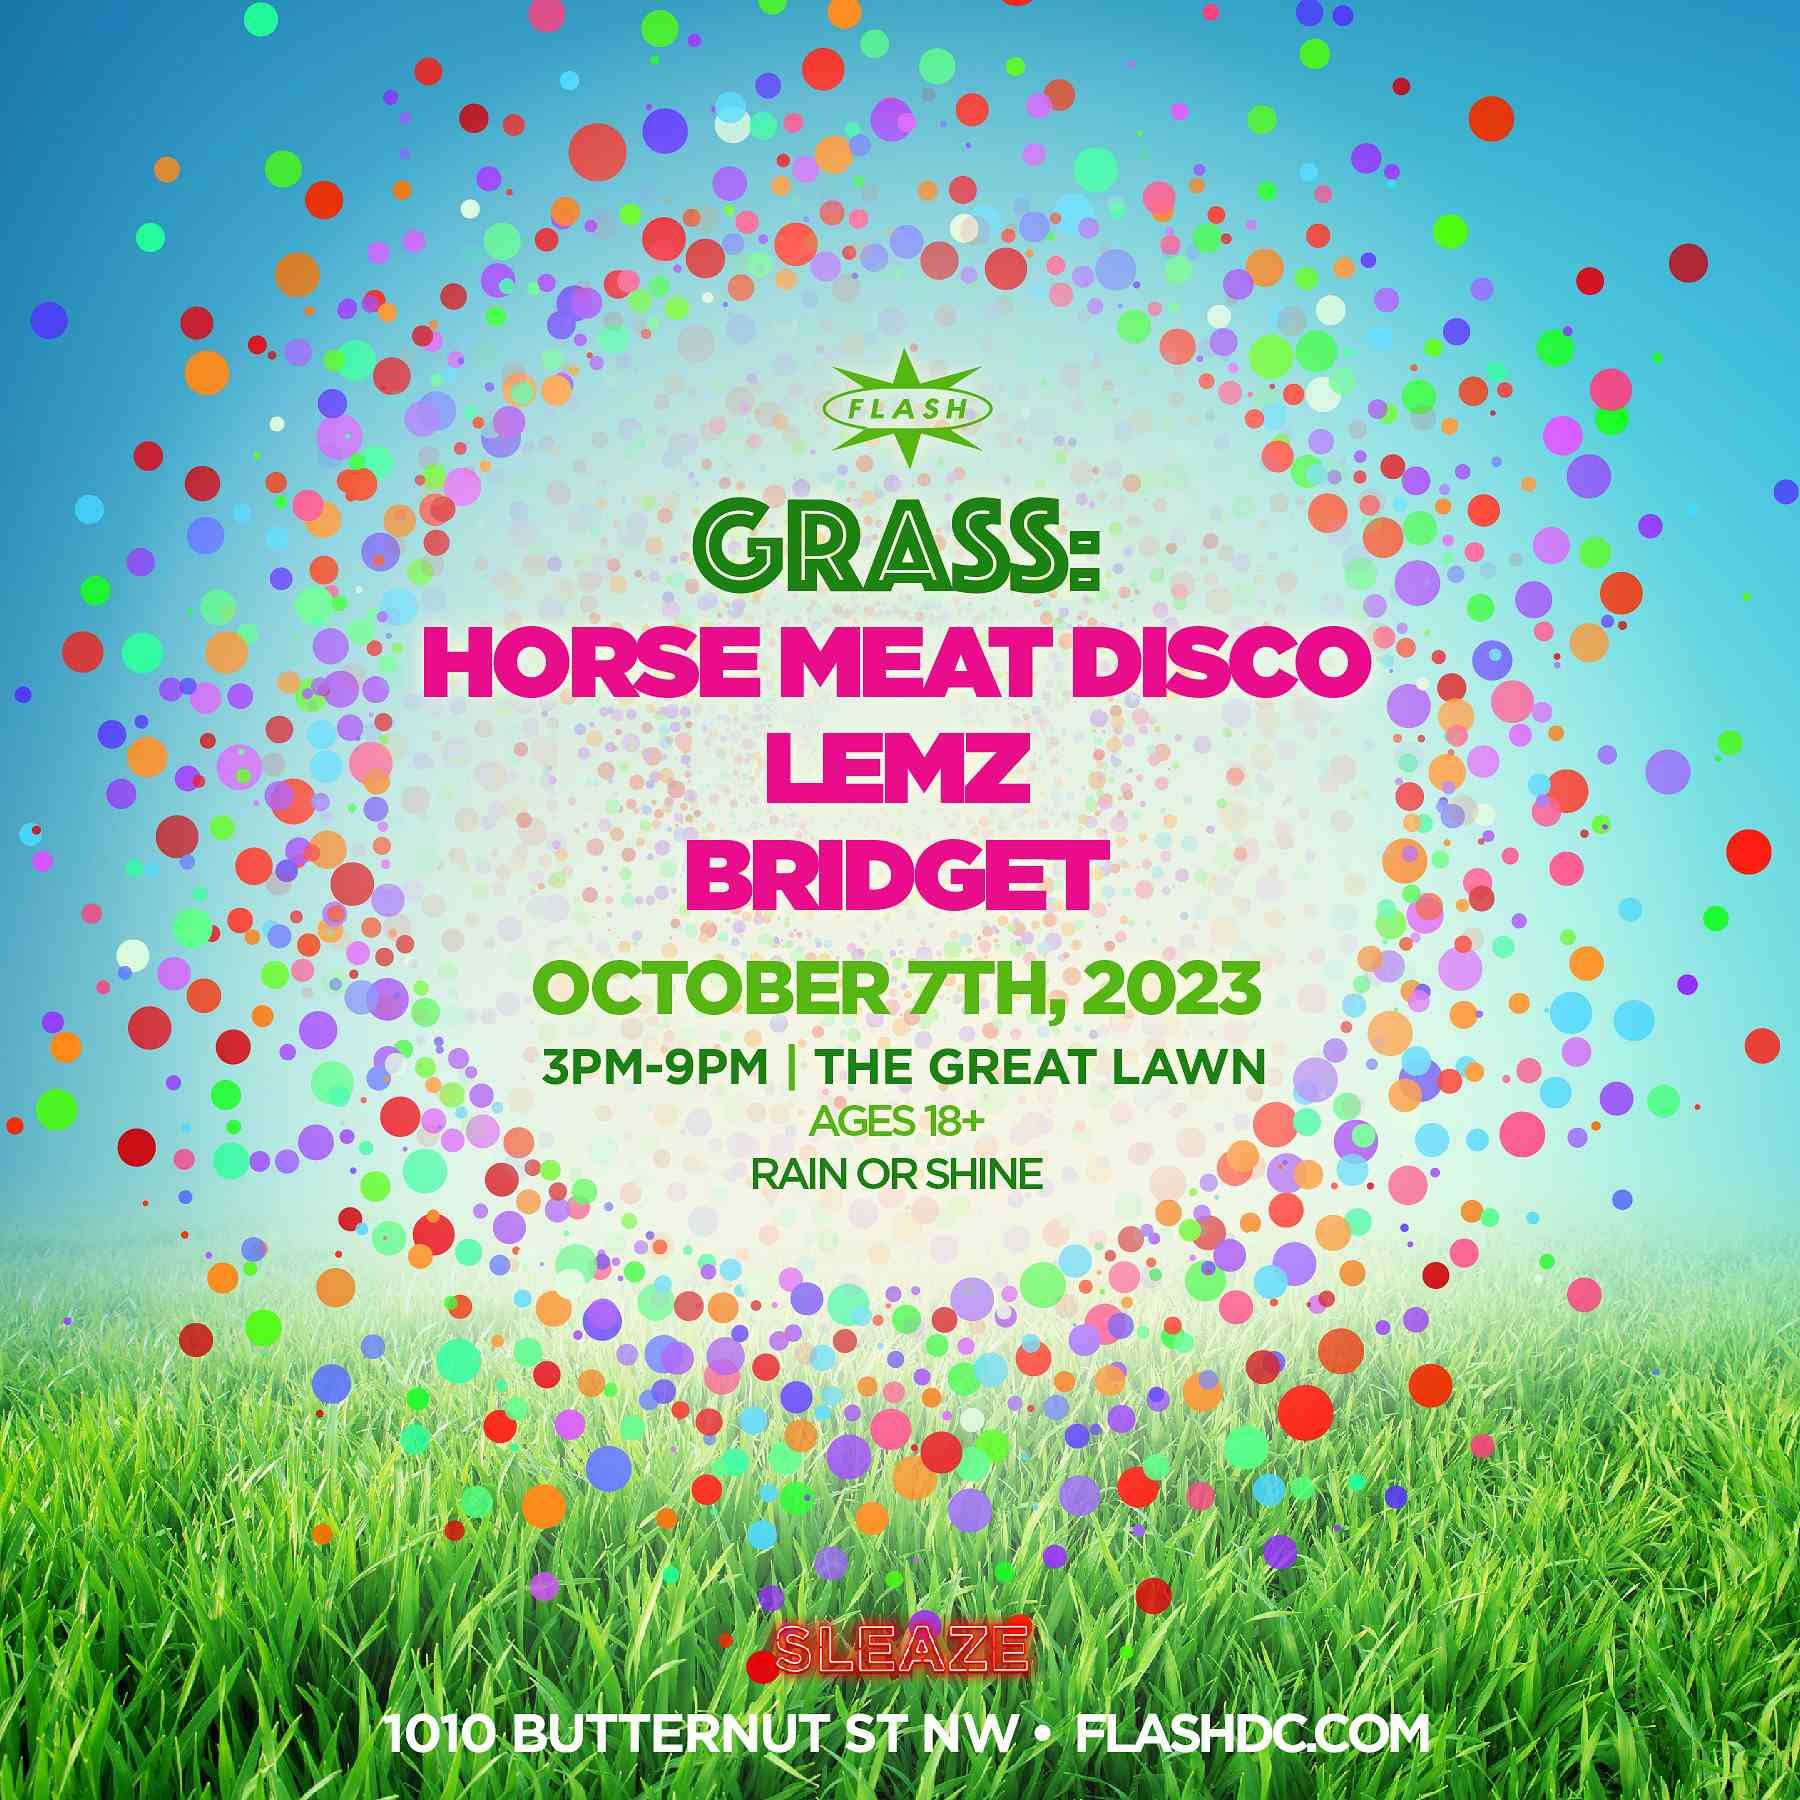 Event image for GRASS: Horse Meat Disco